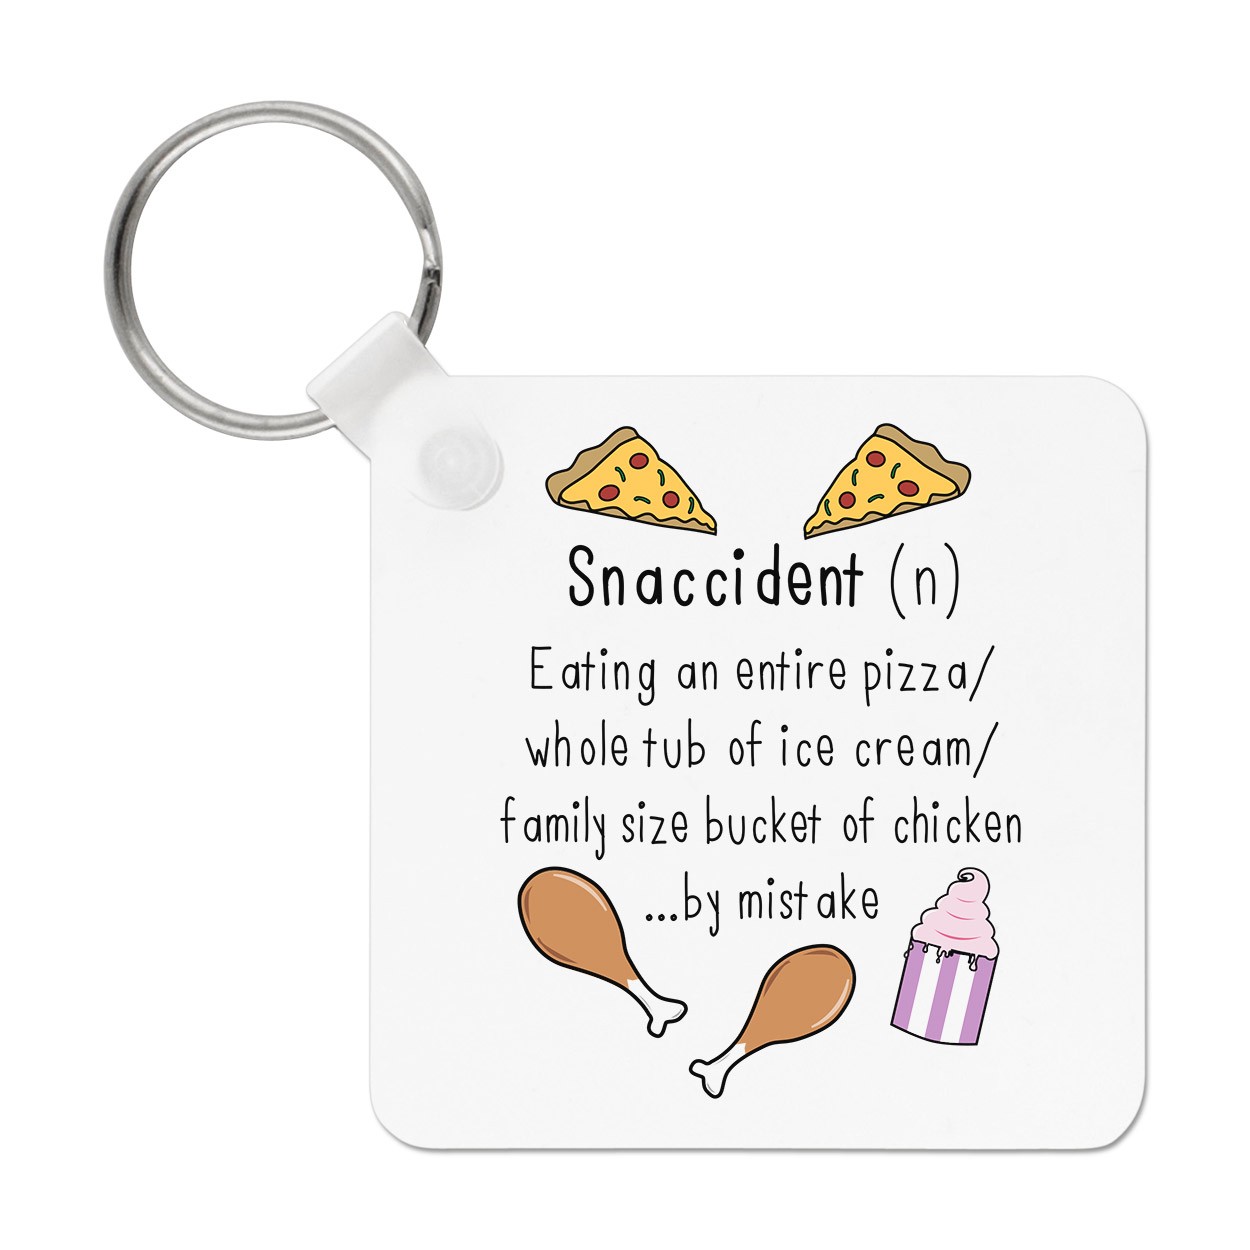 Snaccident Definition Keyring Key Chain